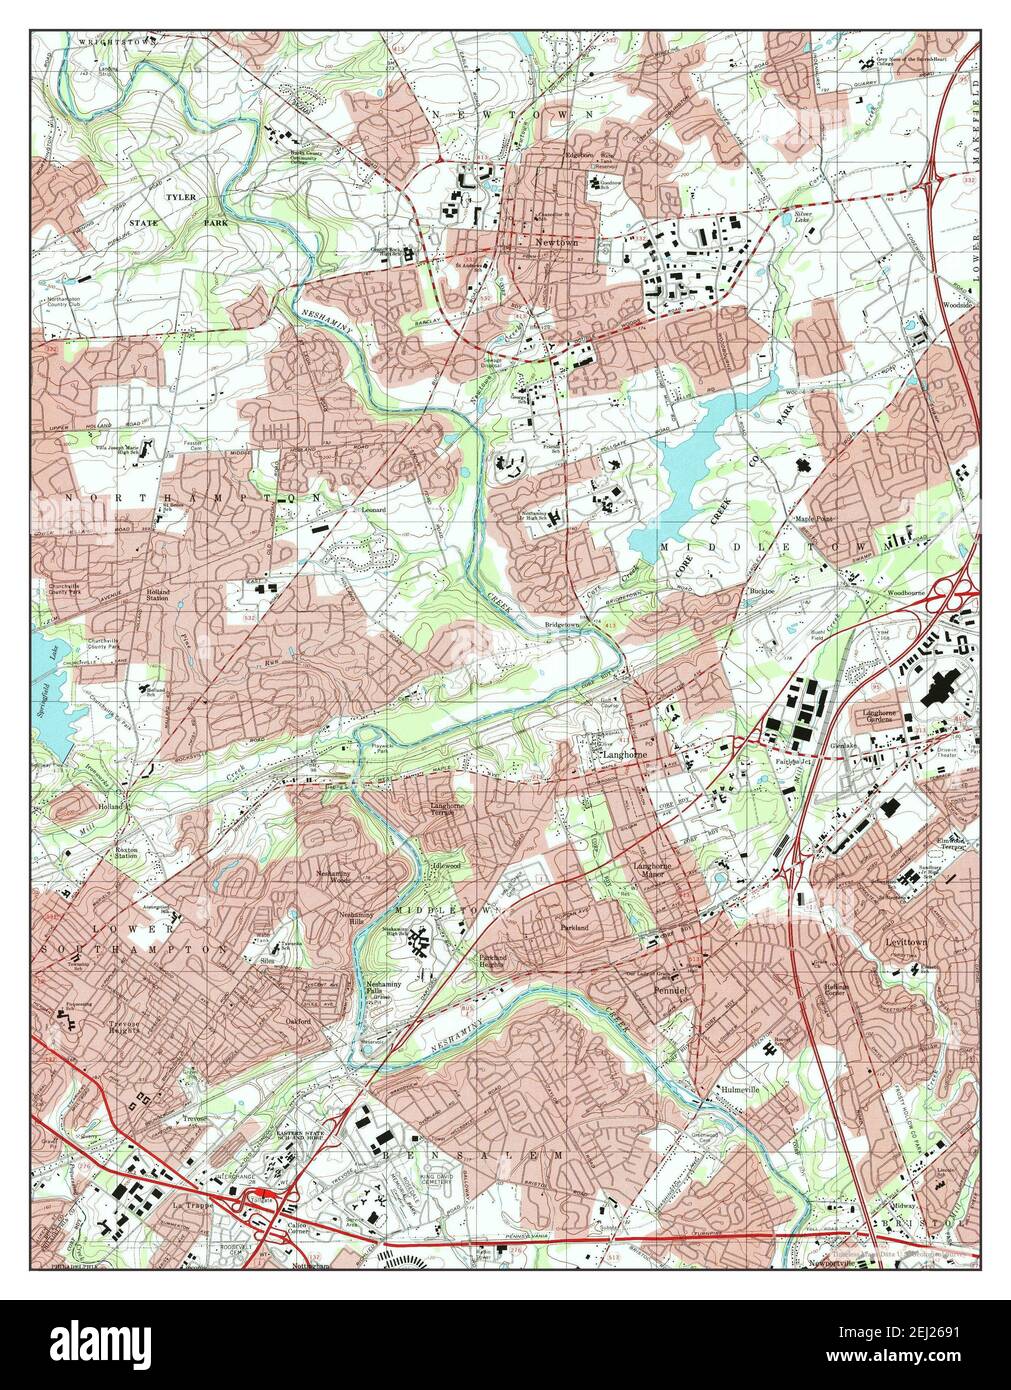 Langhorne, Pennsylvania, map 1993, 1:24000, United States of America by Timeless Maps, data U.S. Geological Survey Stock Photo